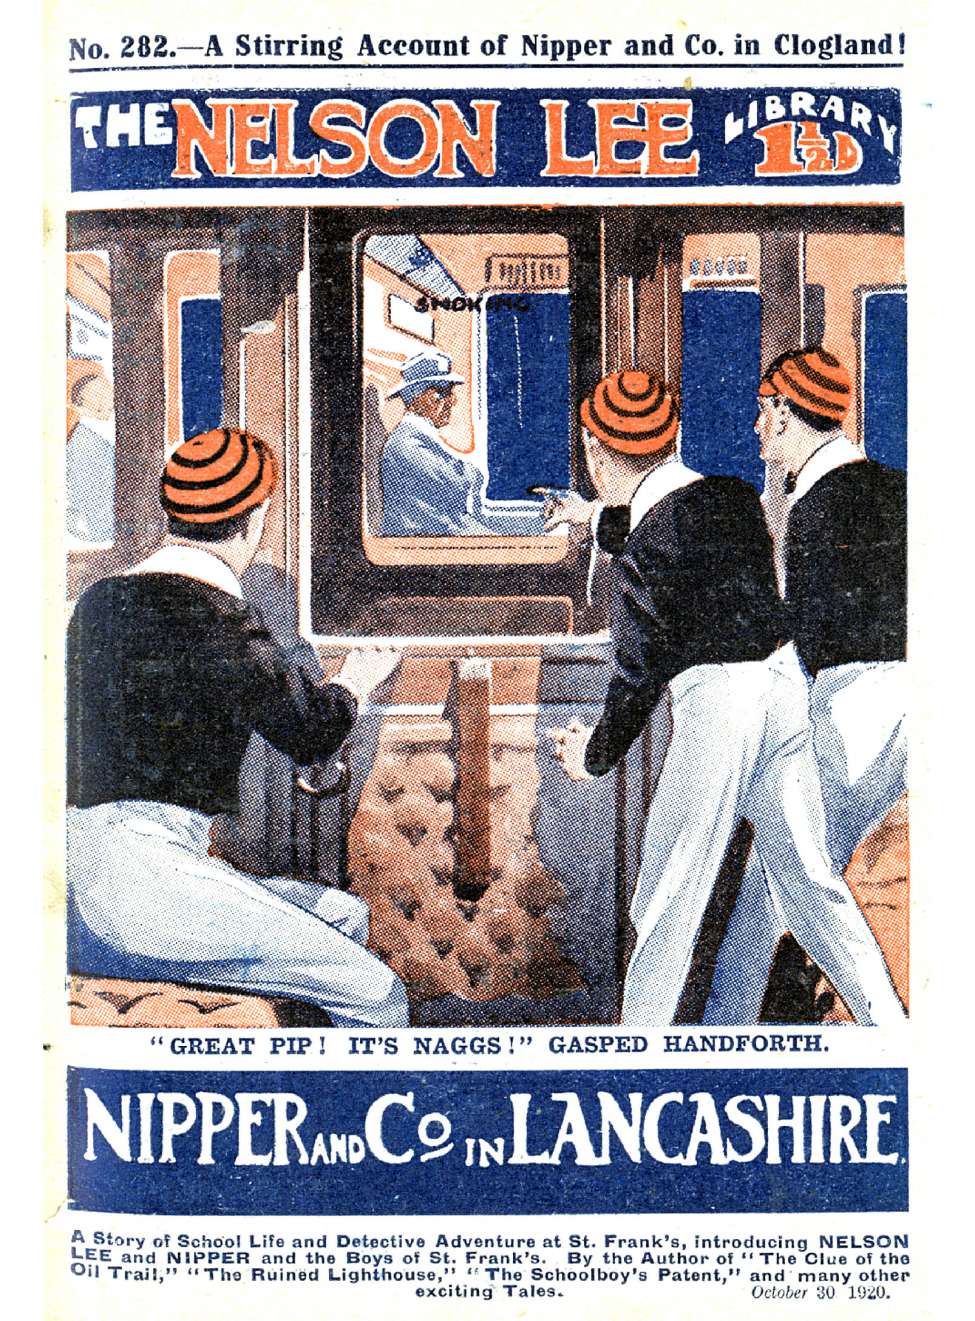 Comic Book Cover For Nelson Lee Library s1 282 - Nipper & Co. in Lancashire